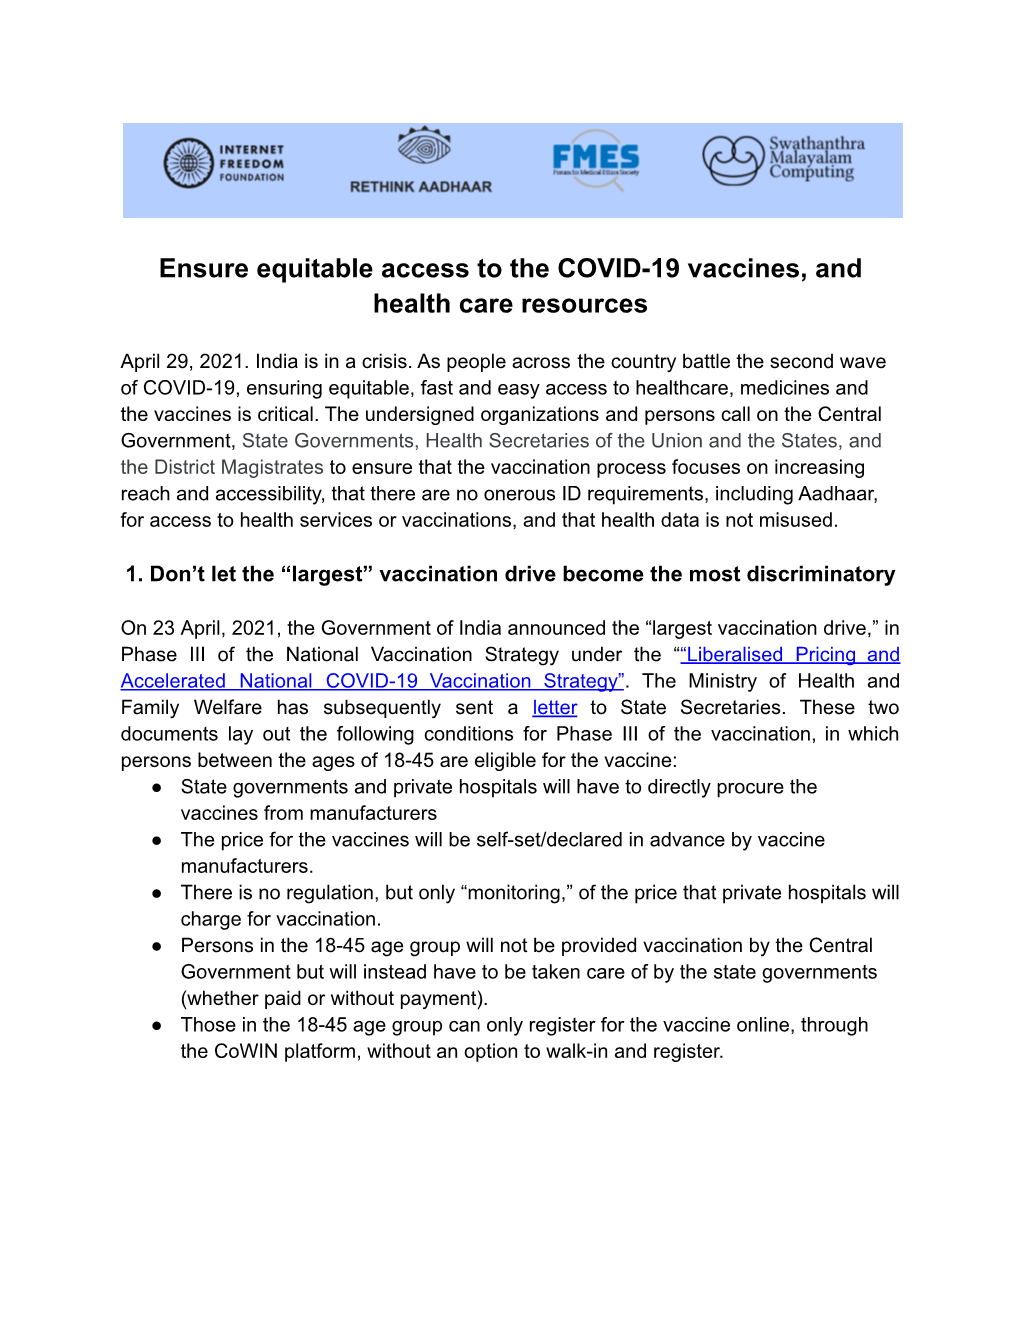 Ensure Equitable Access to the COVID-19 Vaccines, and Health Care Resources